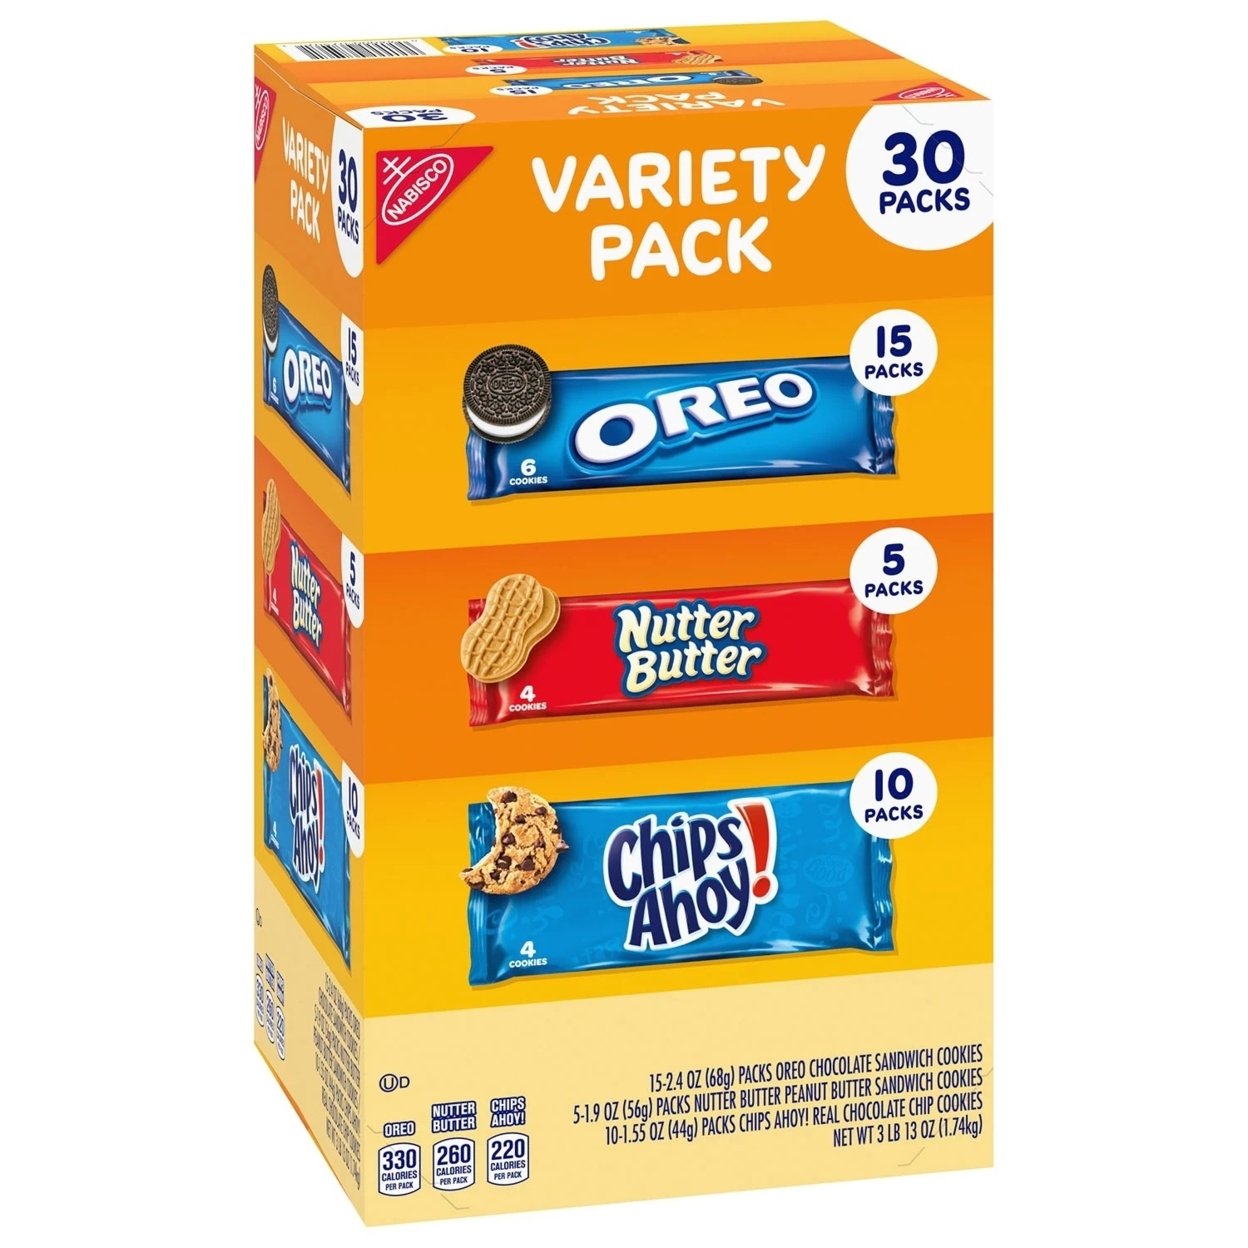 Nabisco Cookie Variety Pack With OREO, Chips Ahoy!, Nutter Butter (30 Pack)